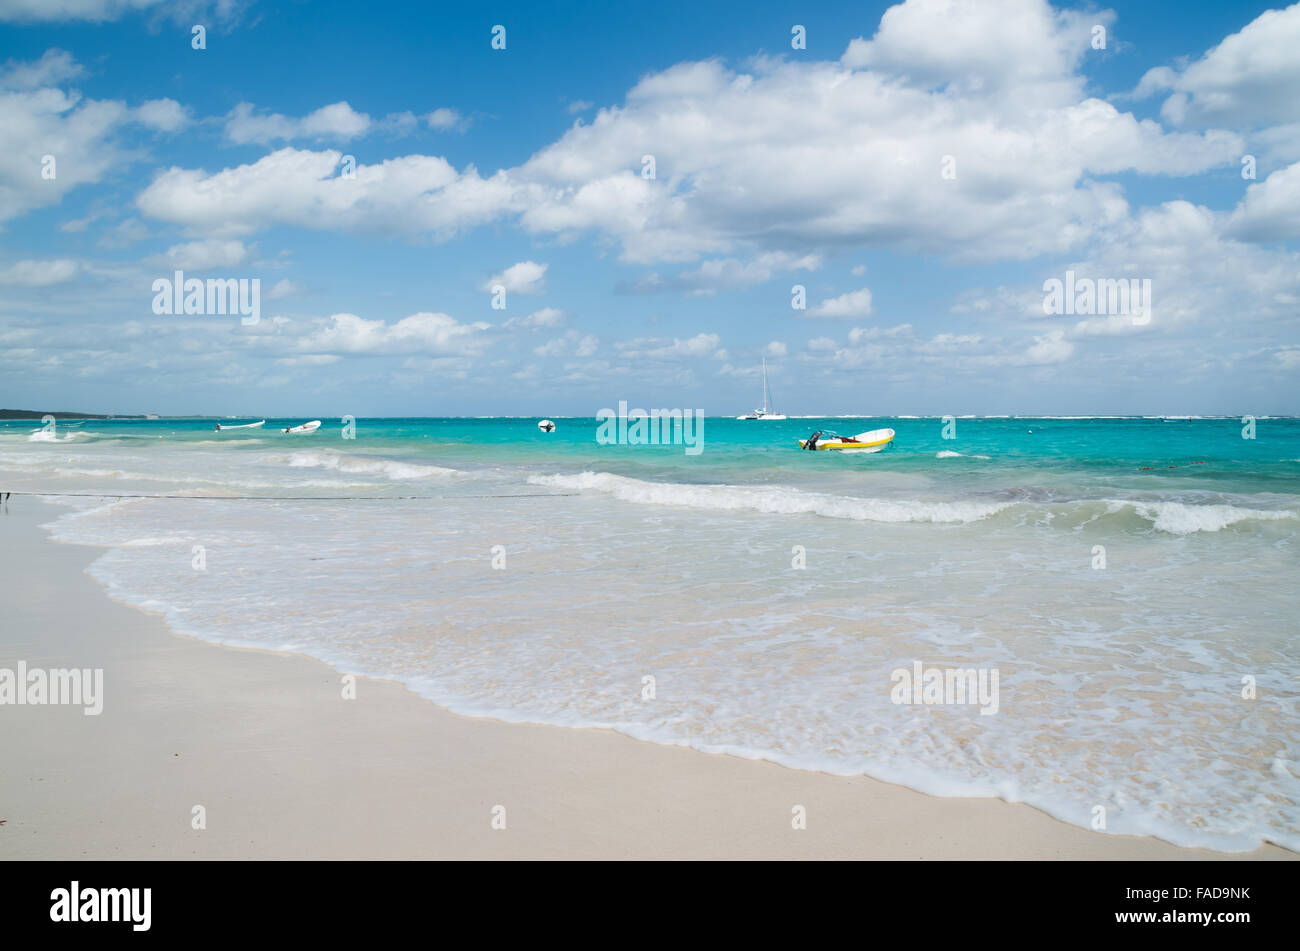 Playa Las Palmas beach near Tulum in the Riviera Maya region of Mexico on a sunny day before a storm set in. Stock Photo